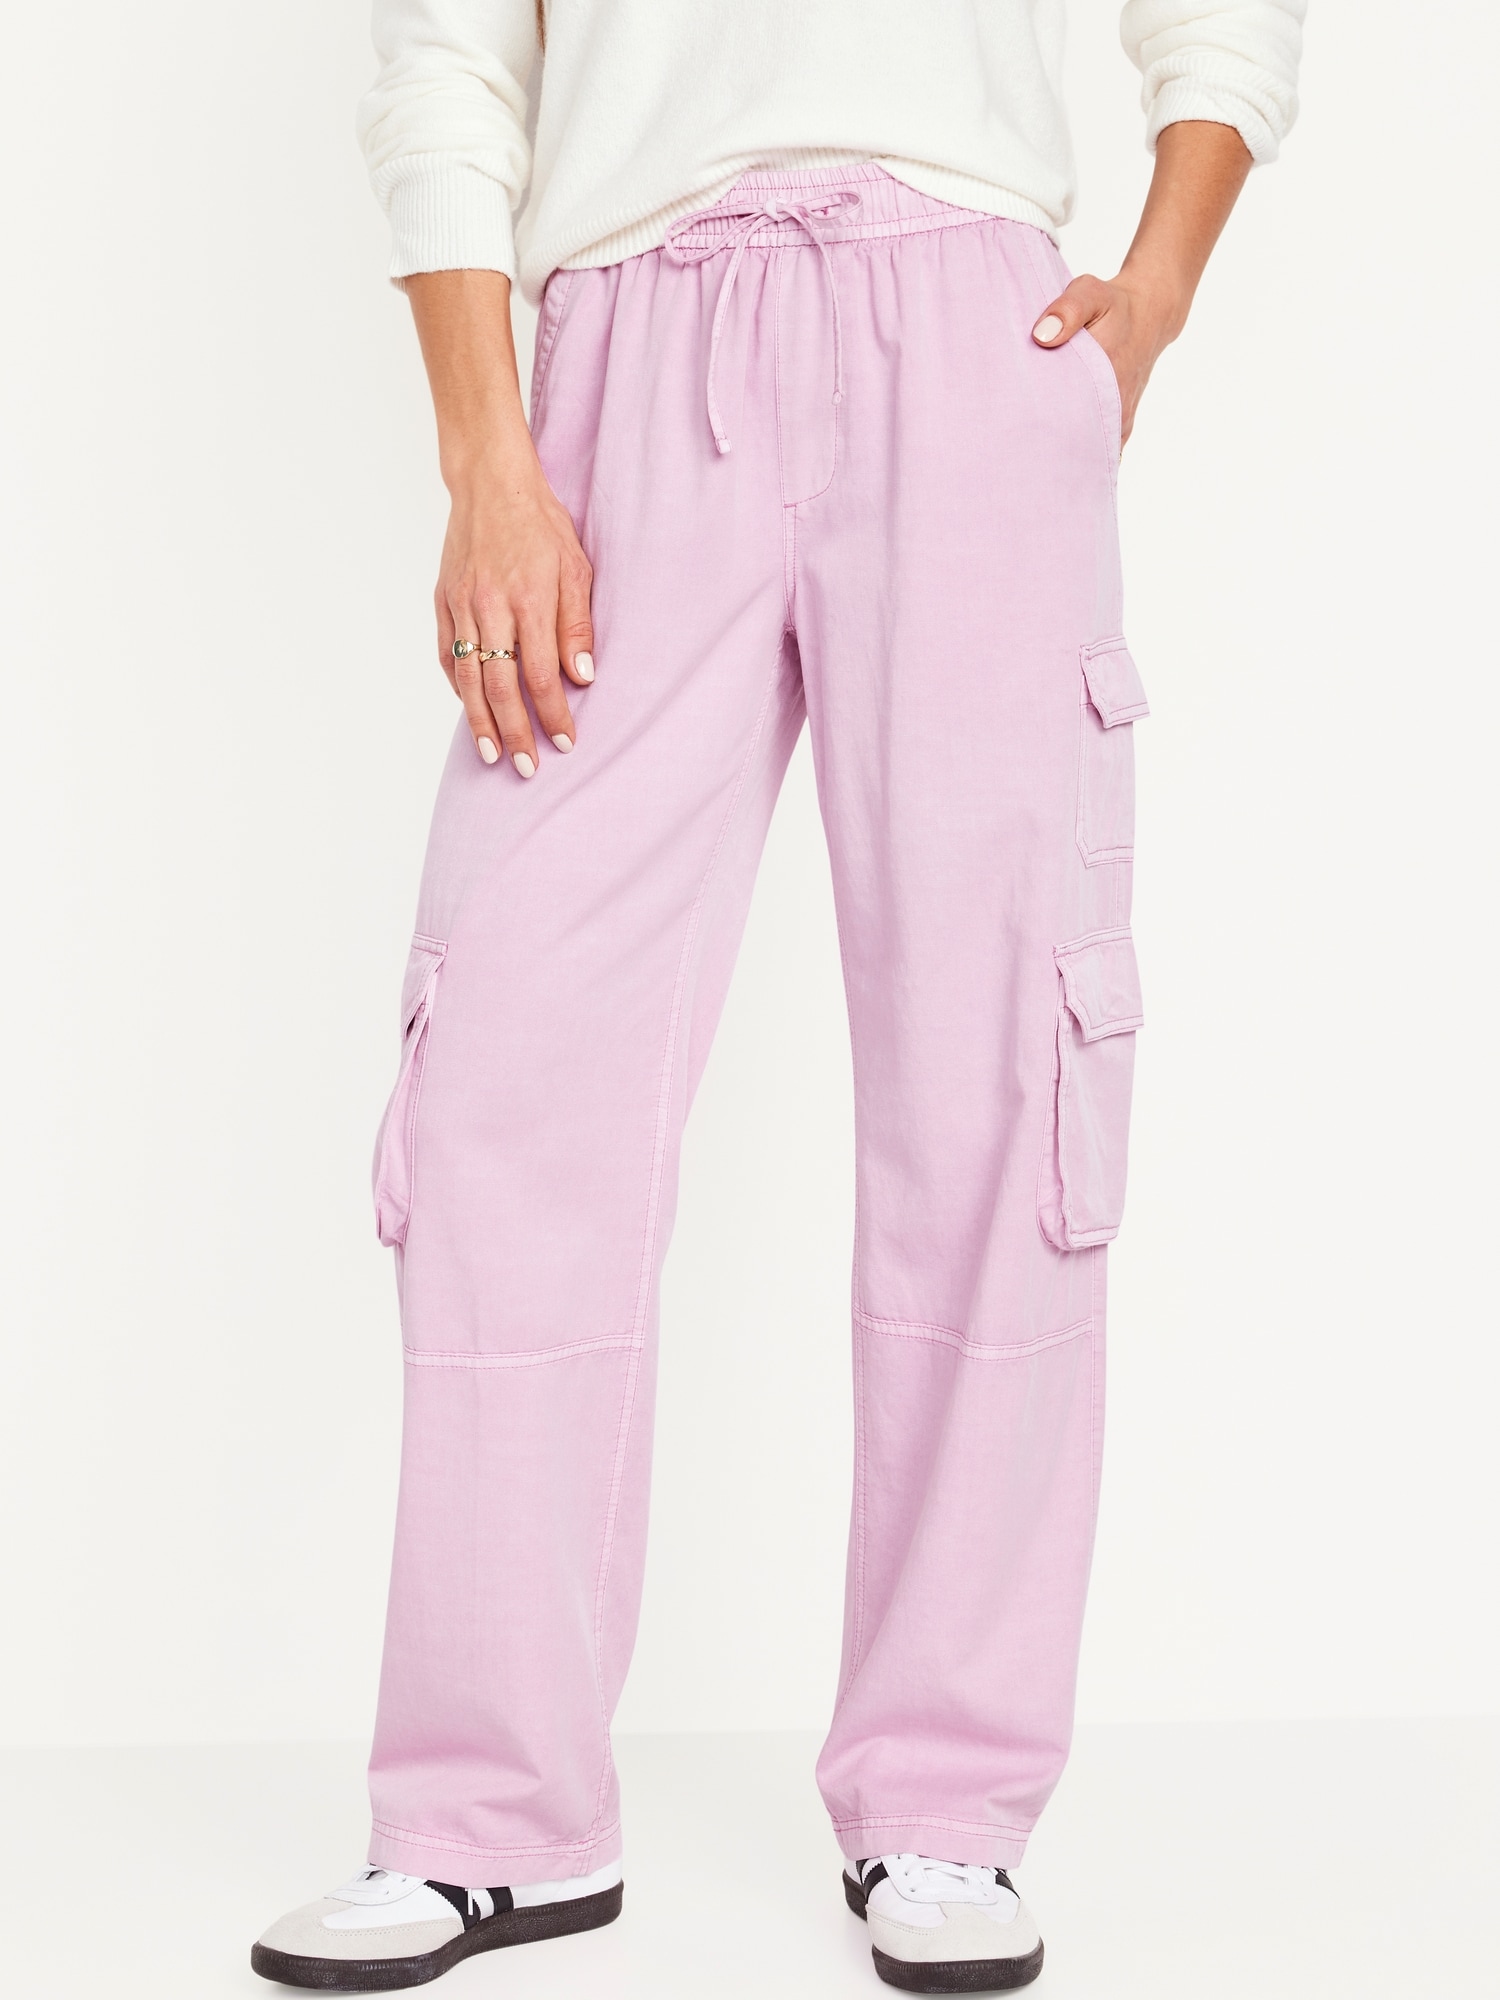 Pink Cargo Trousers, Inc Womens, Baby Pink & Bright Pink